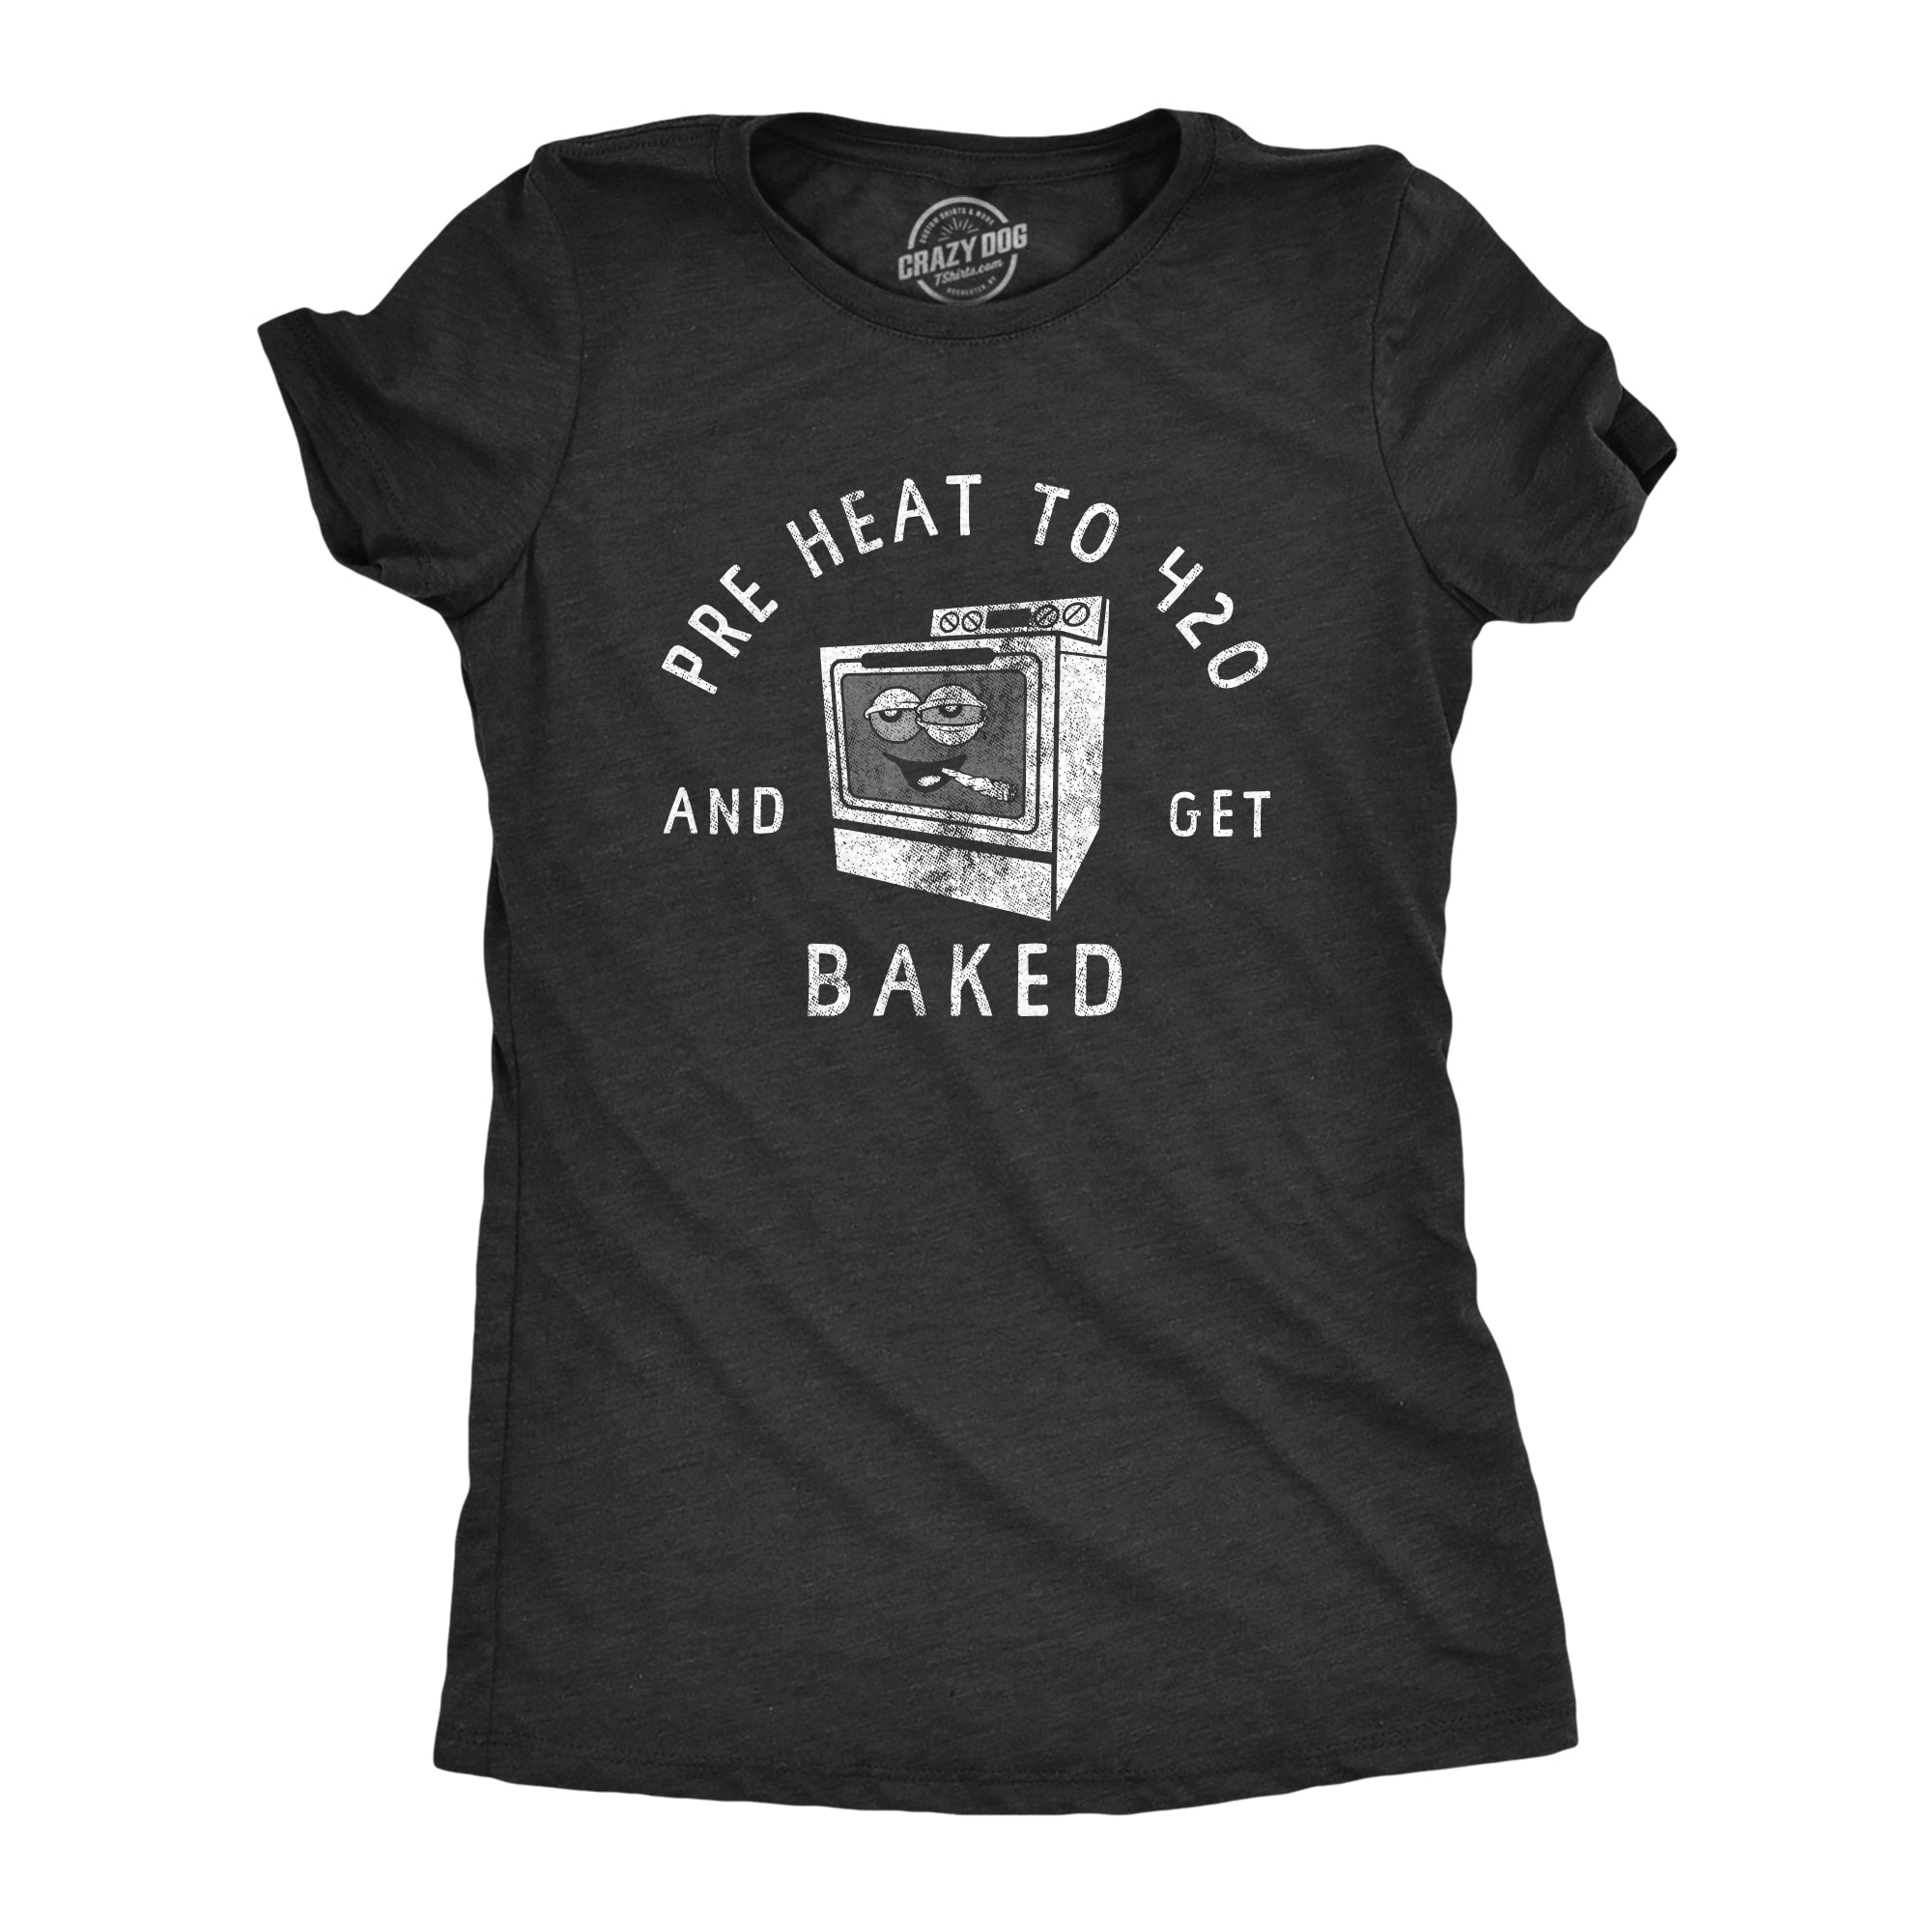 Funny Heather Black Pre Heat To 420 And Get Baked Womens T Shirt Nerdy 420 Sarcastic Tee